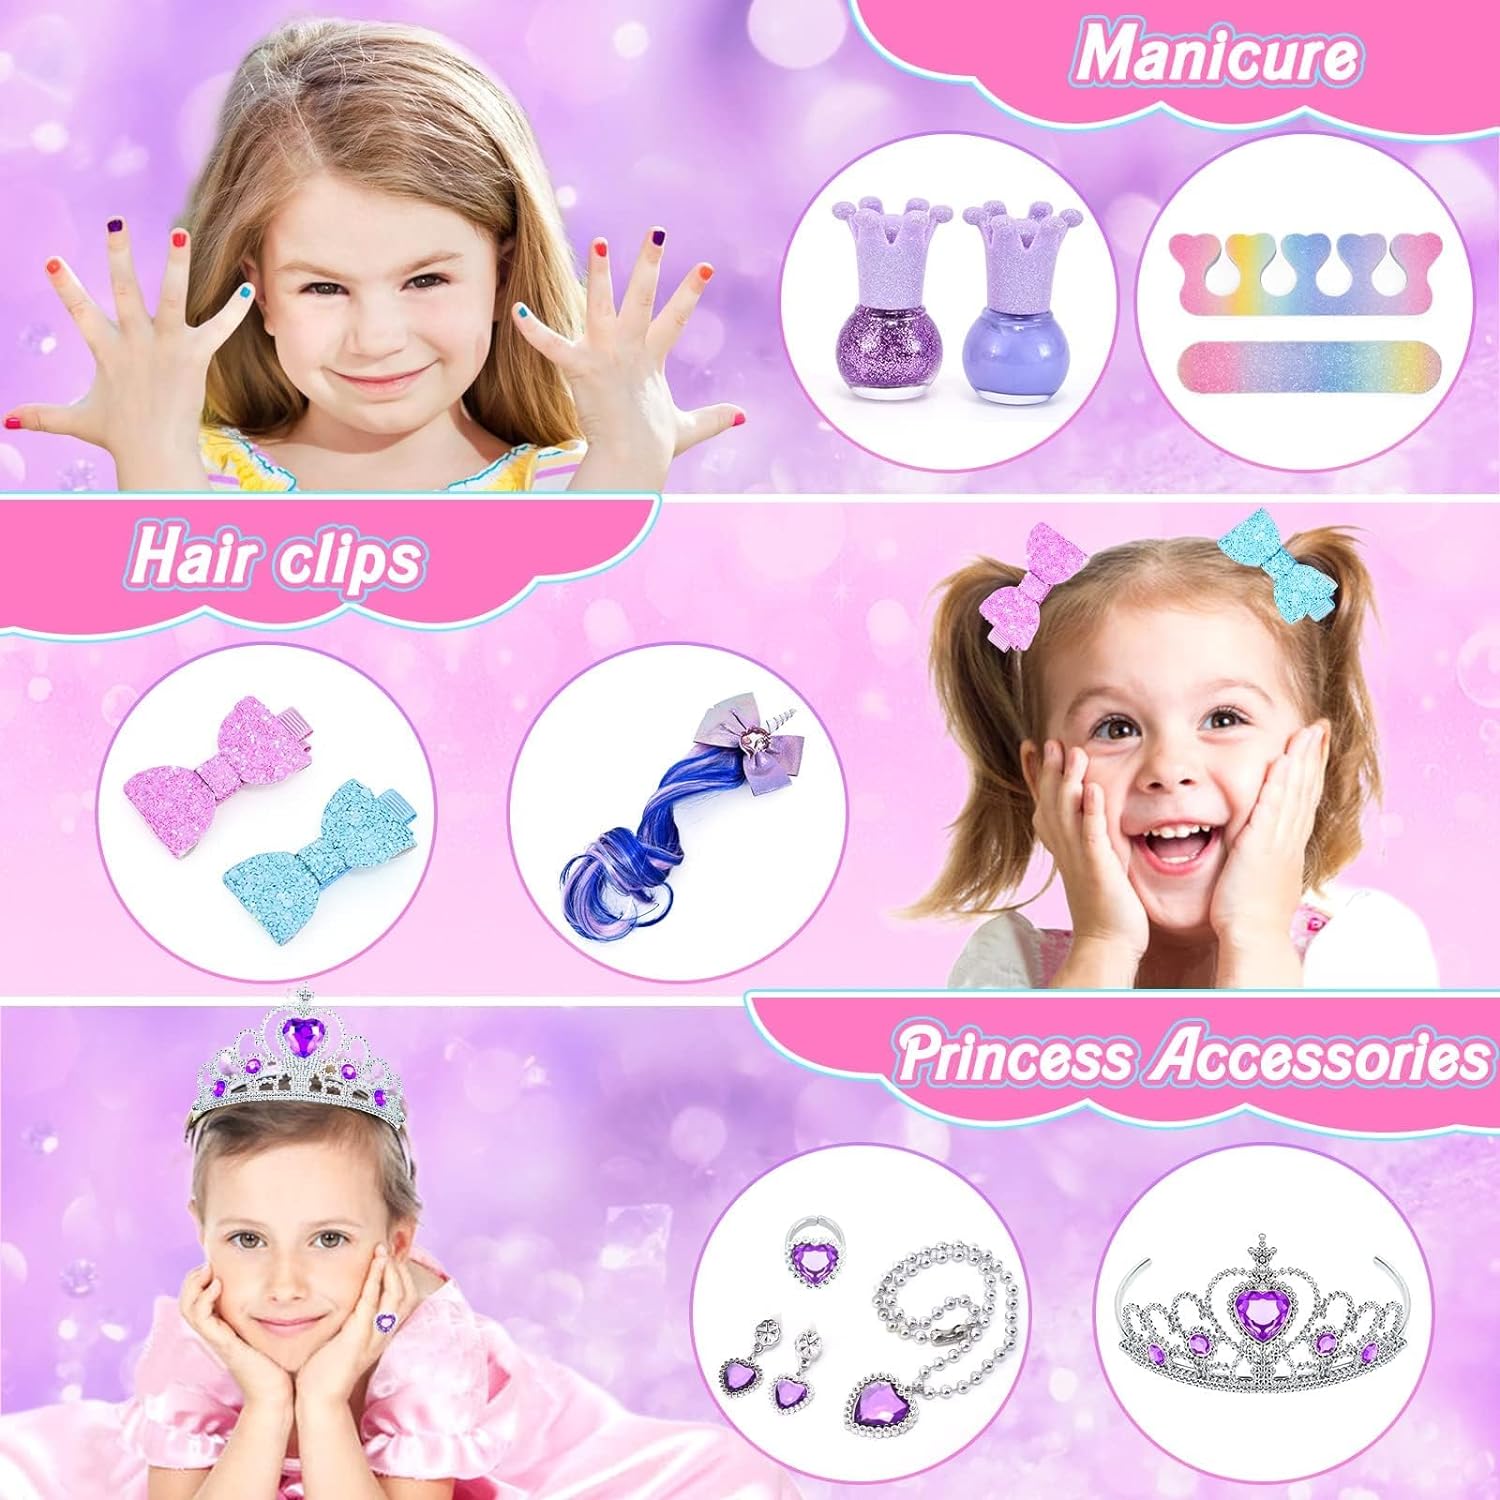 Kids Makeup Kit for Girls, Unicorn Makeup Set, Real Washable Make up Kit for Little Girl Princess Toddler Makeup for Kid Birthday Gifts Unicorn Toys for Girls 3 4 5 6 7 8 9 10 Year Old